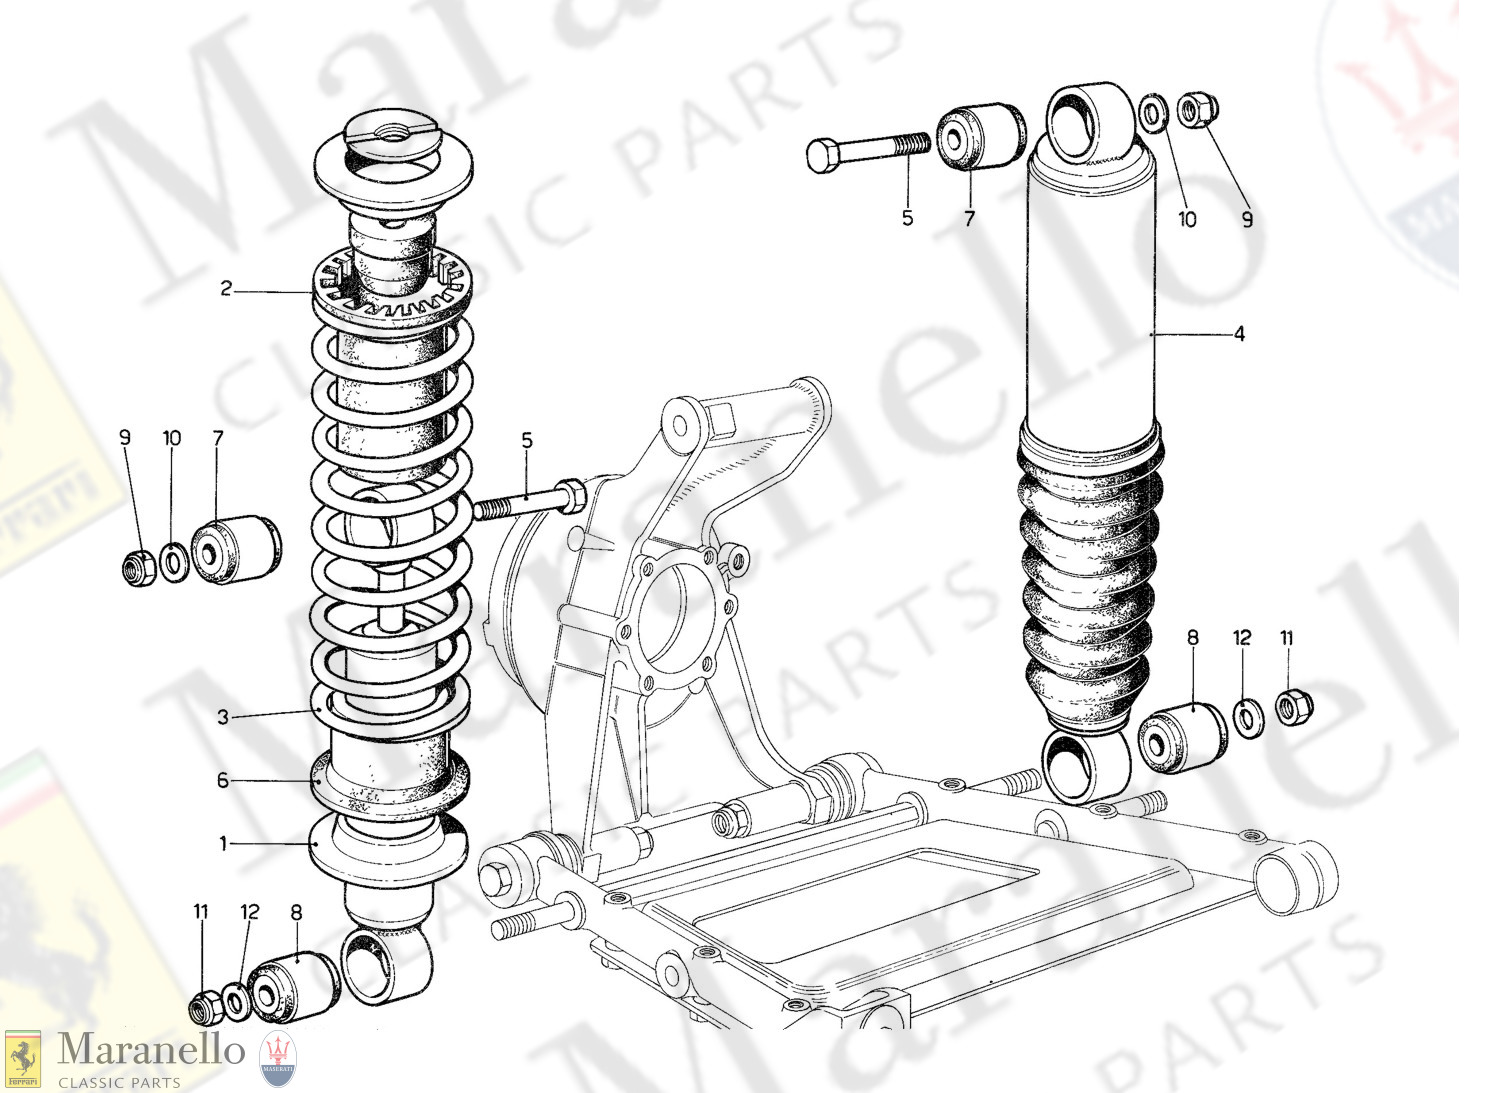 041 - Rear Suspension - Shock Absorber And Self-Levelling Unit